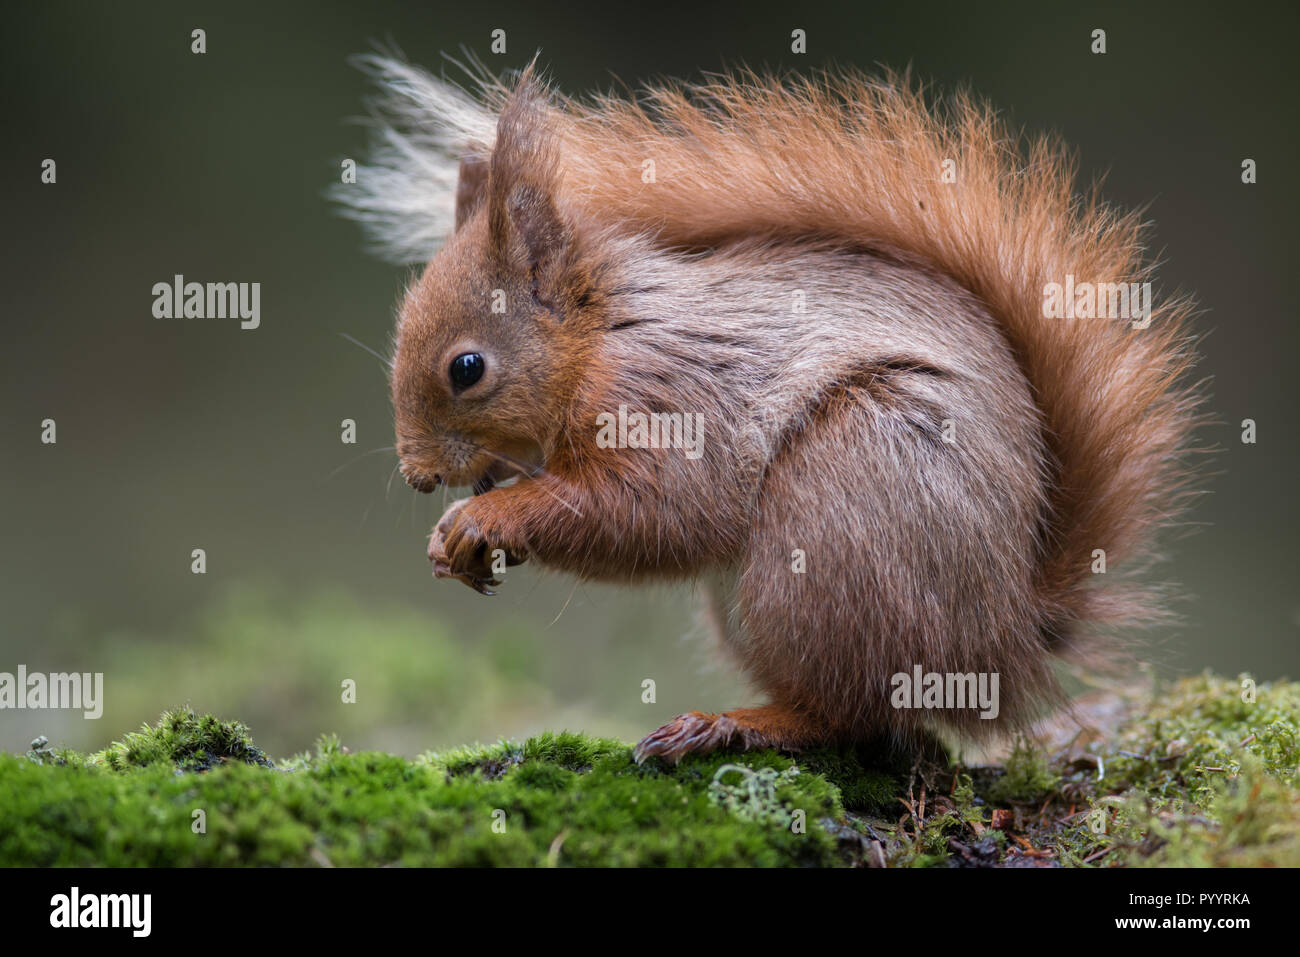 A close up of a red squirrel sitting on grass. It is a typical pose with the bushy tail over its back. The image almost fills the entire frame Stock Photo